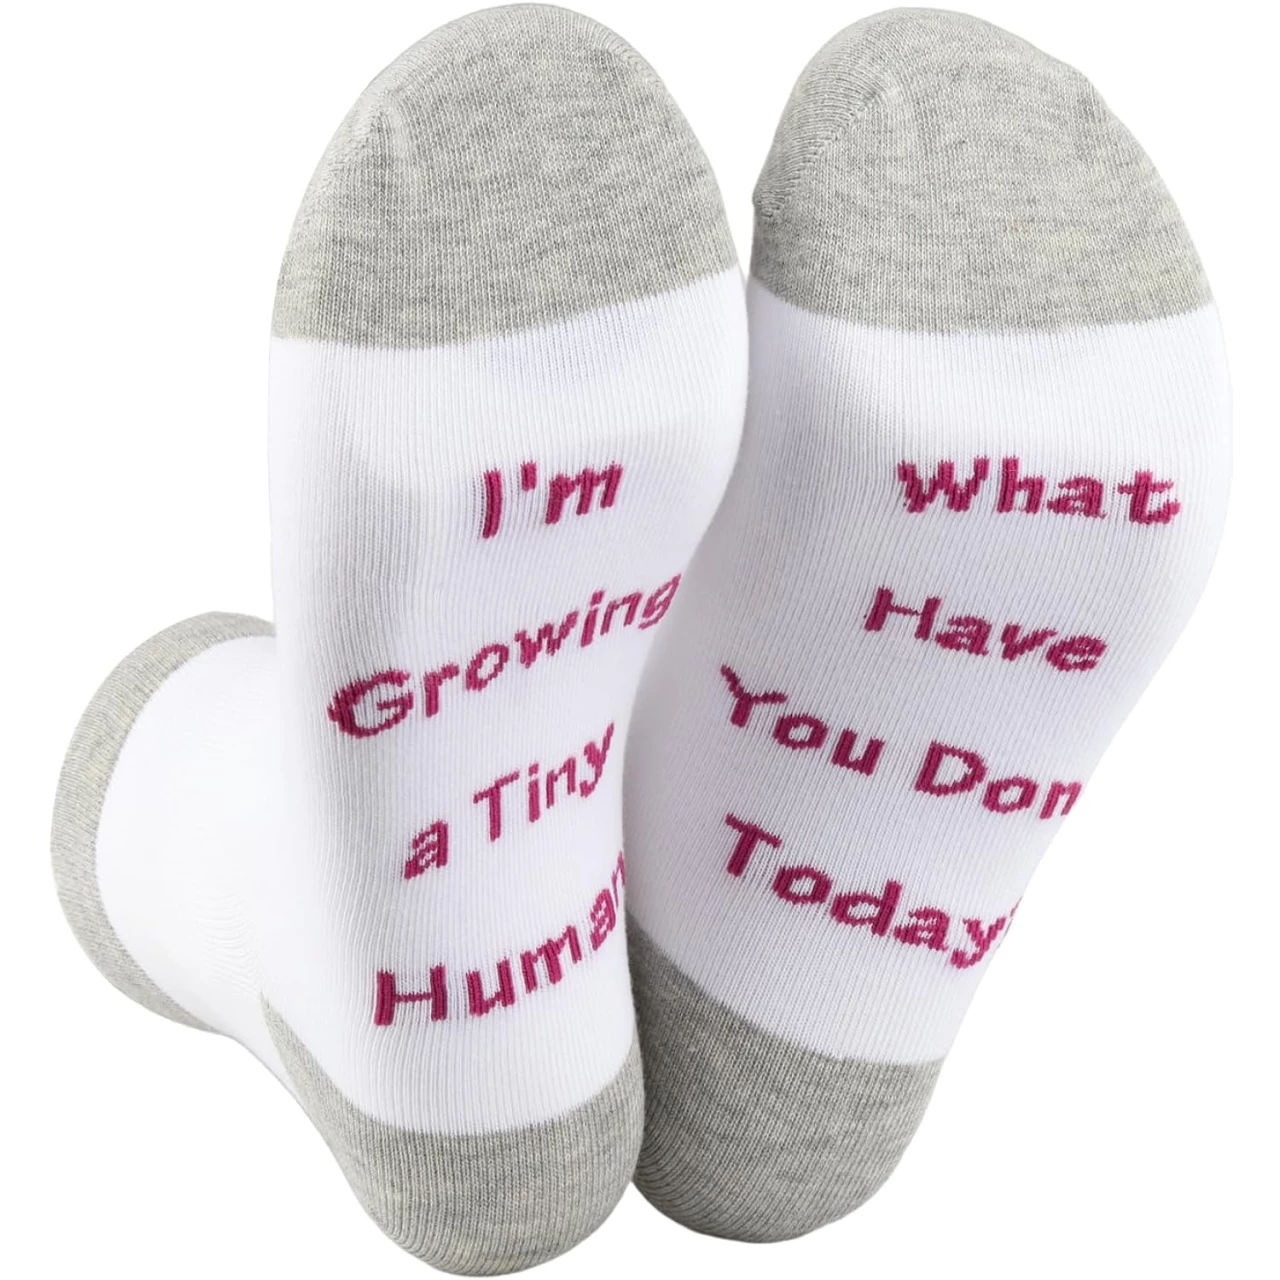 CENWA 1 Pair Pregnancy Gift New Mom Gifts